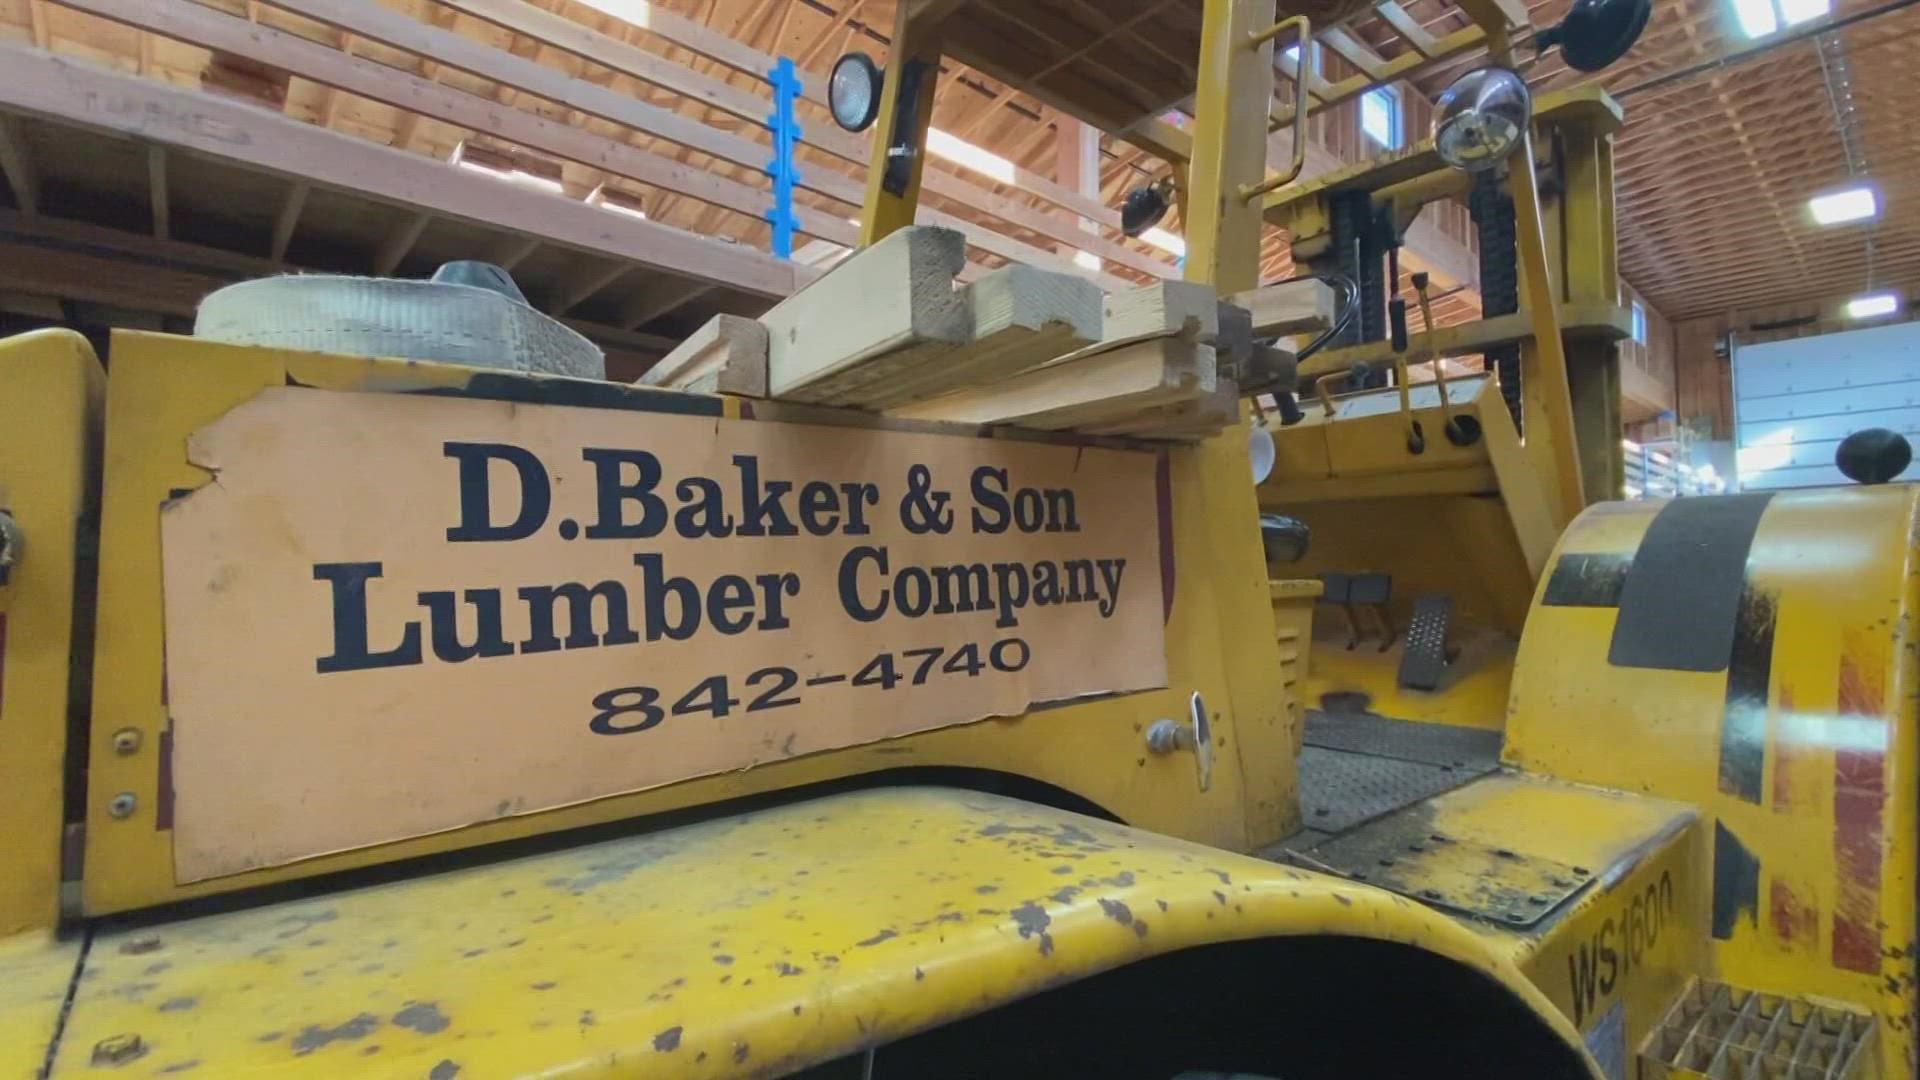 D. Baker & Son Lumber Company is celebrating 150 years in business!